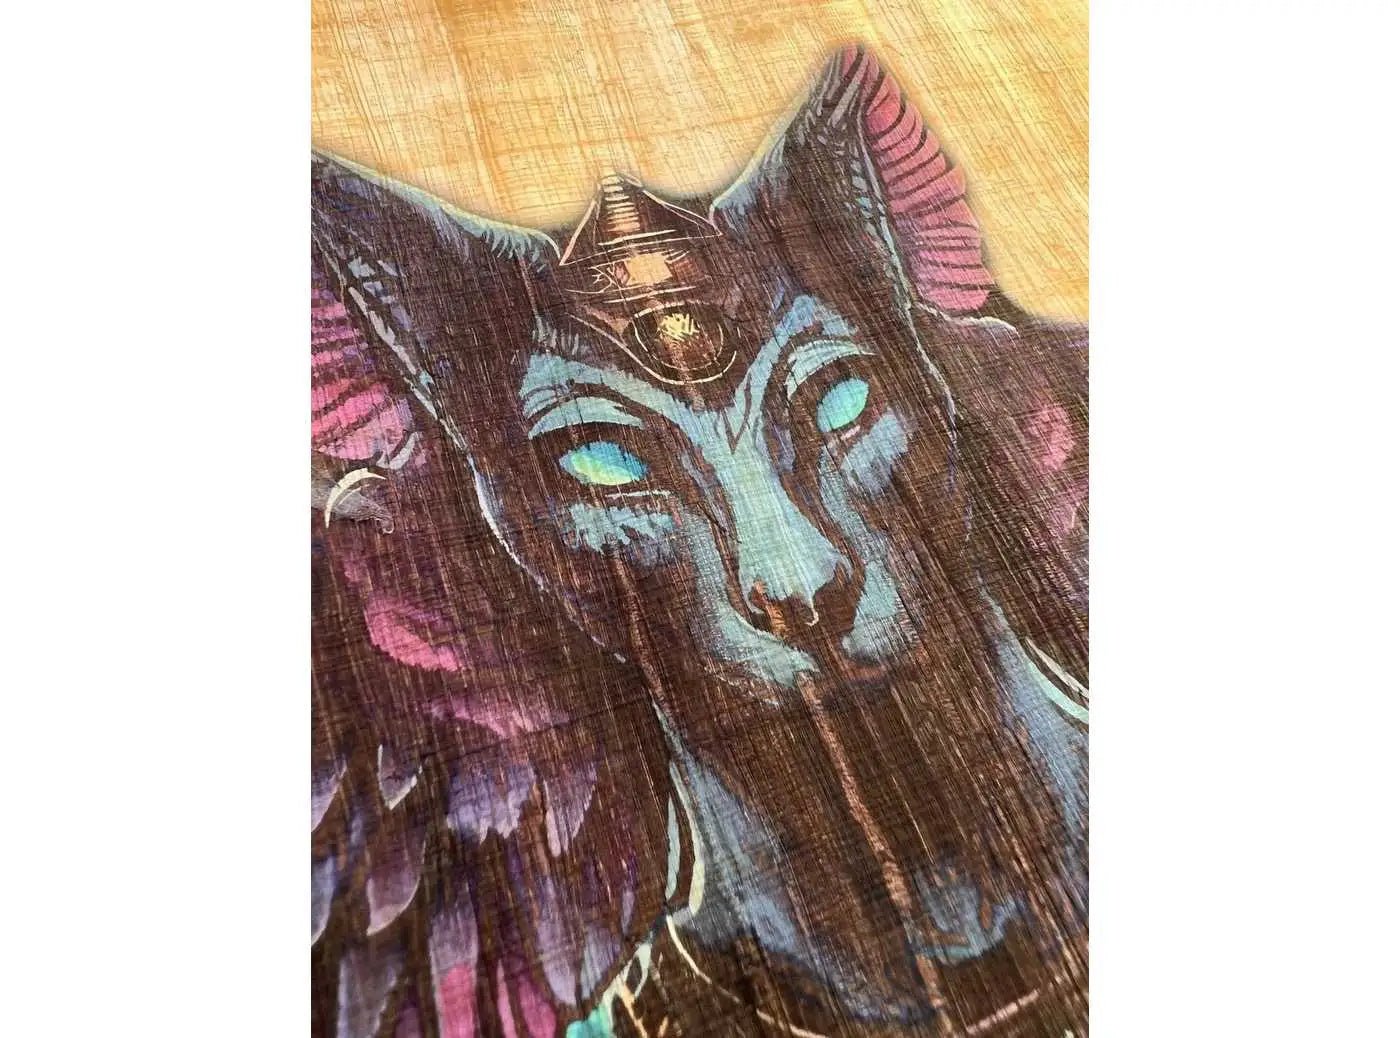 Egyptian Sphinx Cat Printing on Egyptian Vintage Papyrus Paper